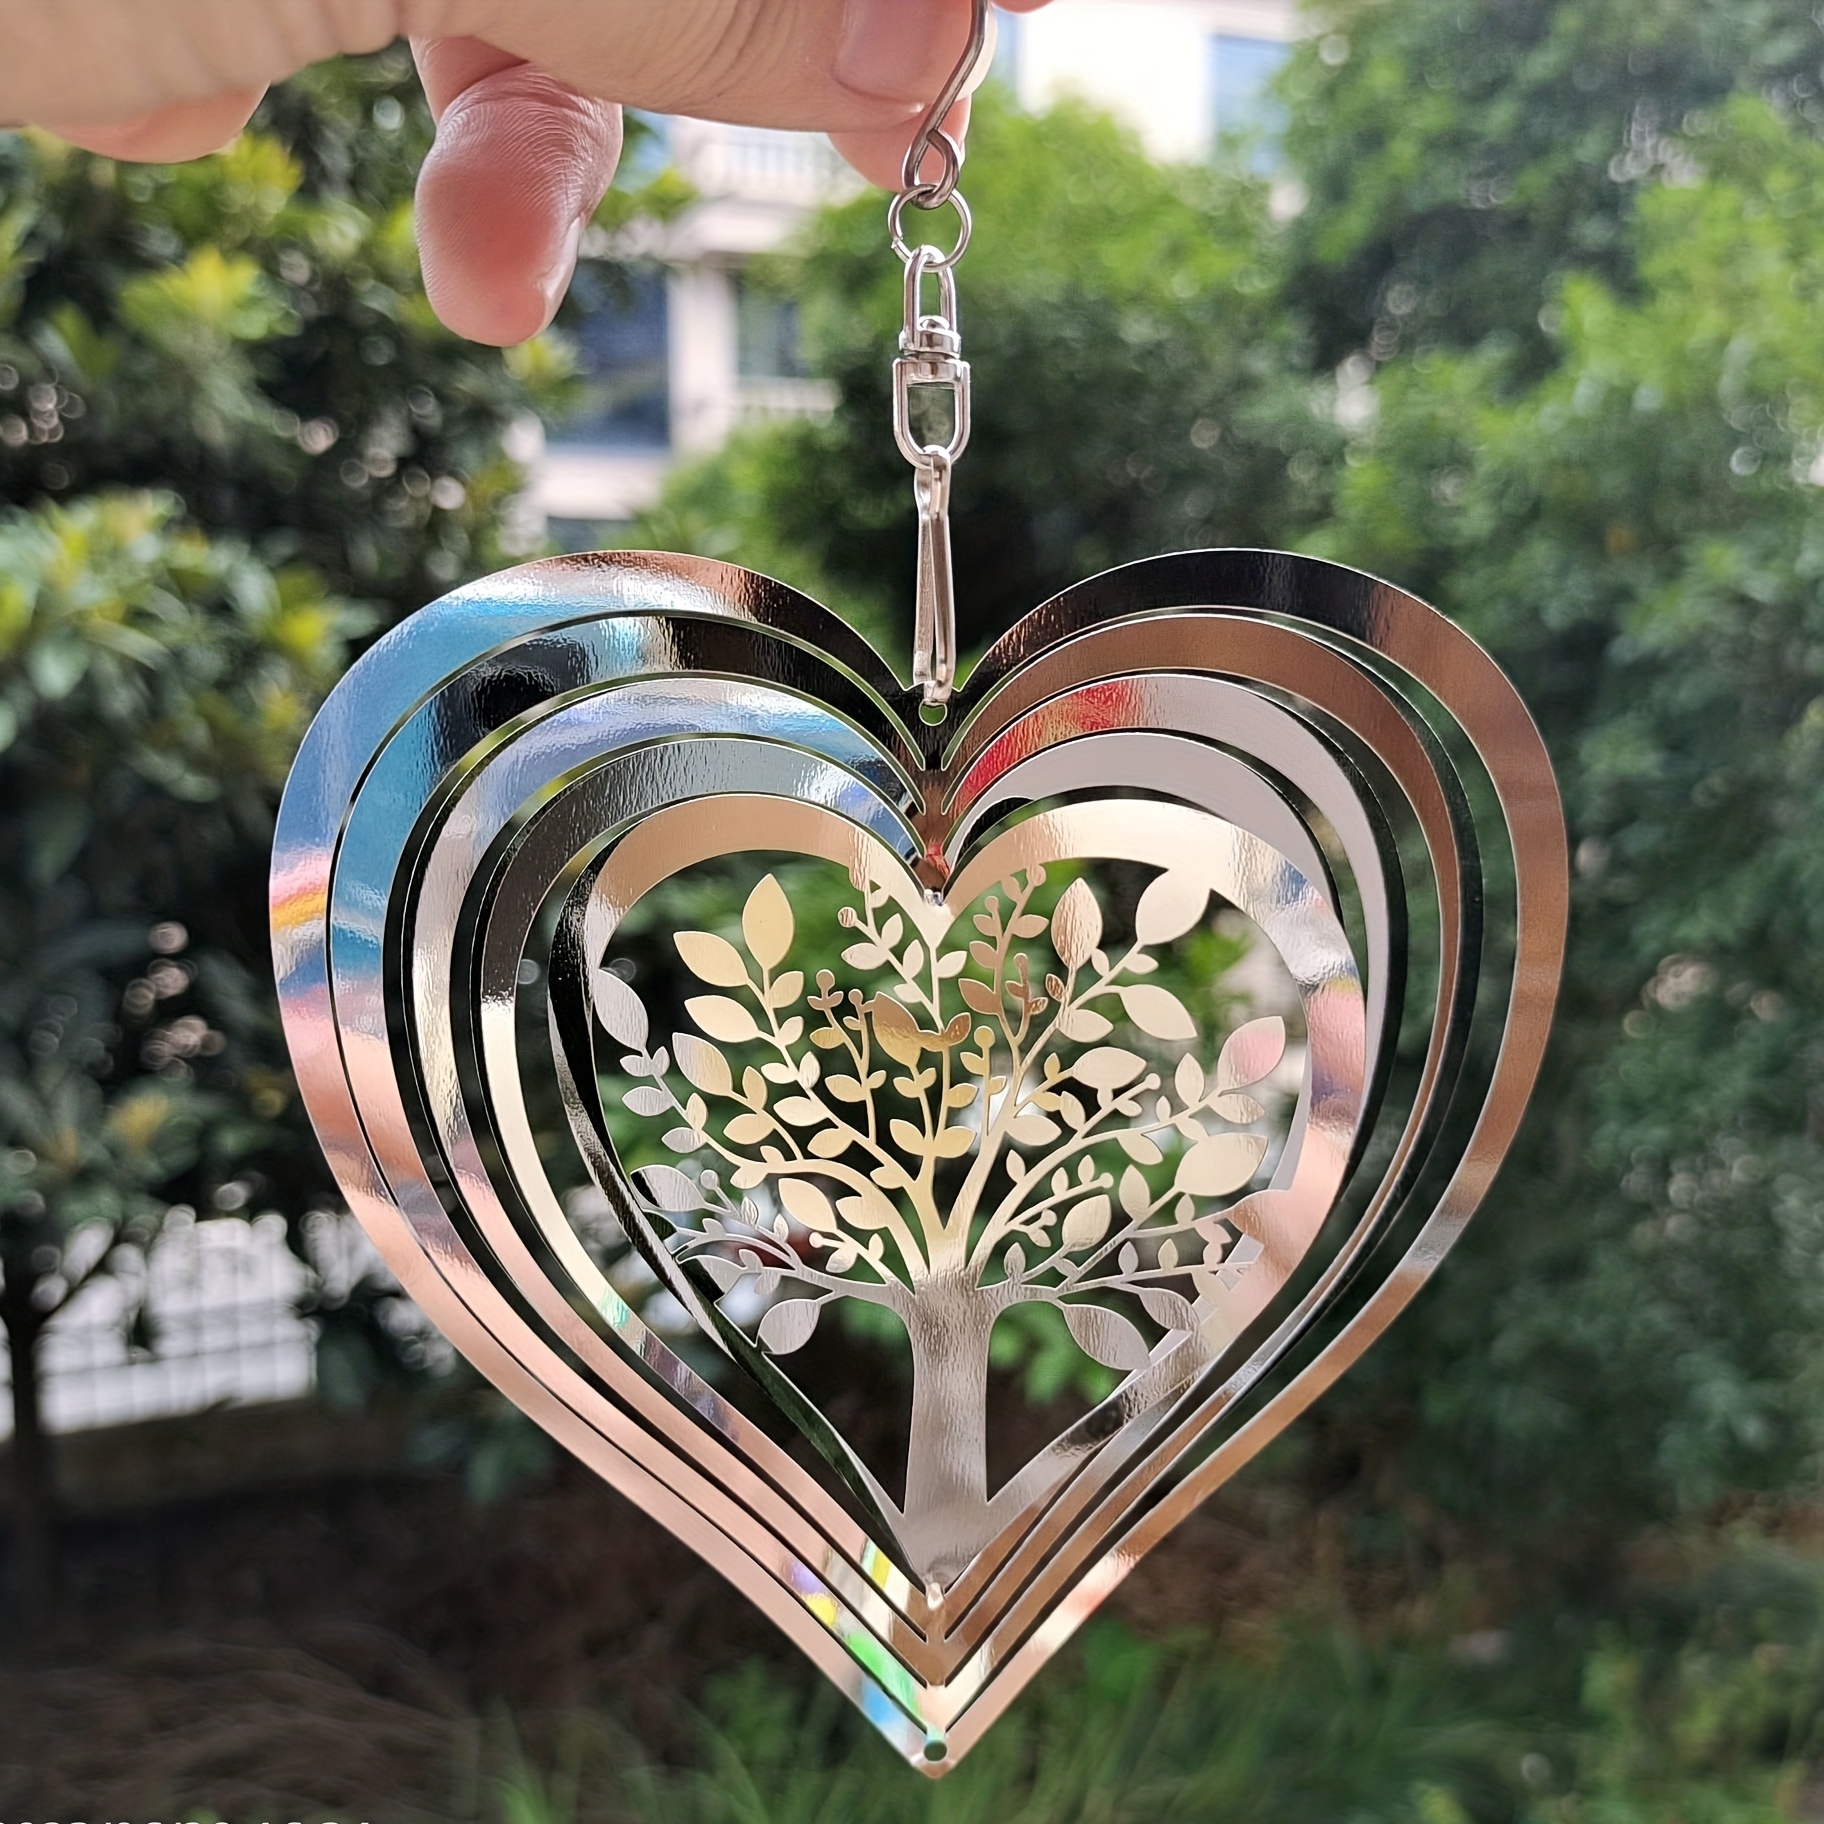 

1pc, Silvery Colour 3d Rotation Heart Shape The Tree Of Life Metal Wind Chime Sun Catcher Stainless Steel Metal Wind Spinner Hanging Decoration Or Home Garden